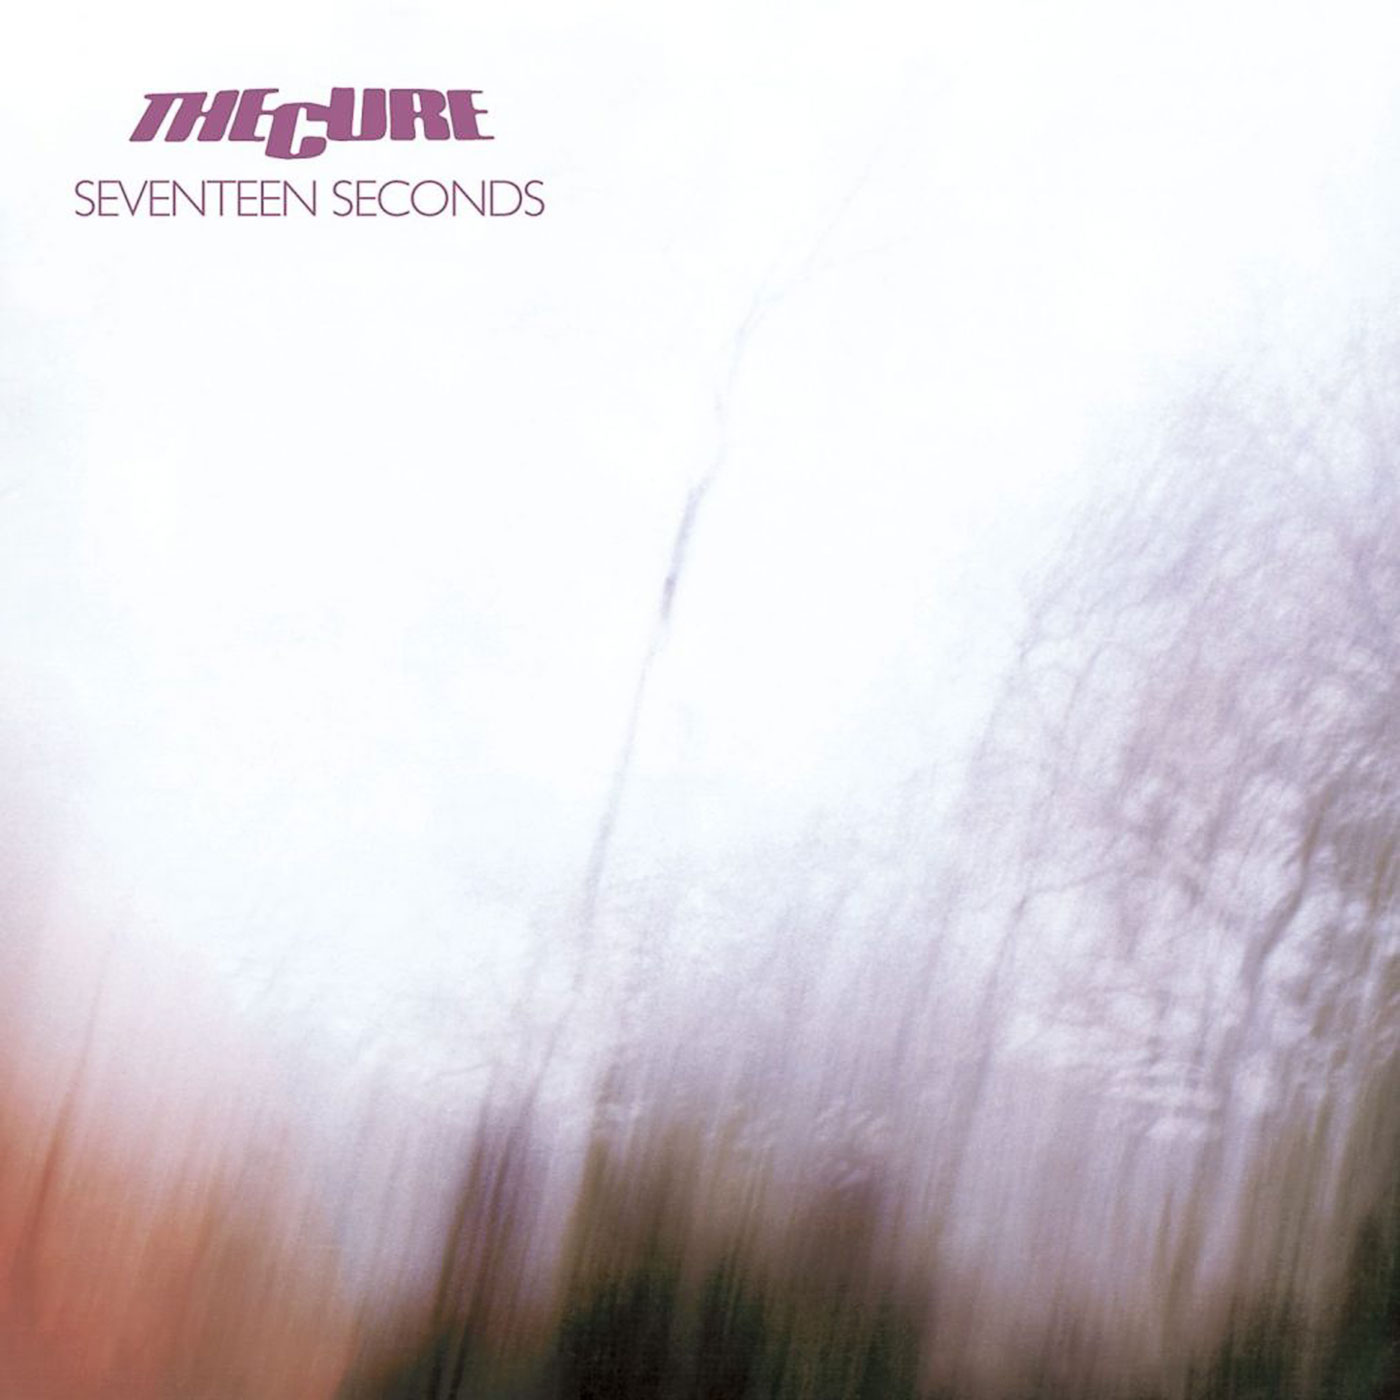 461 The Cure – Seventeen Seconds